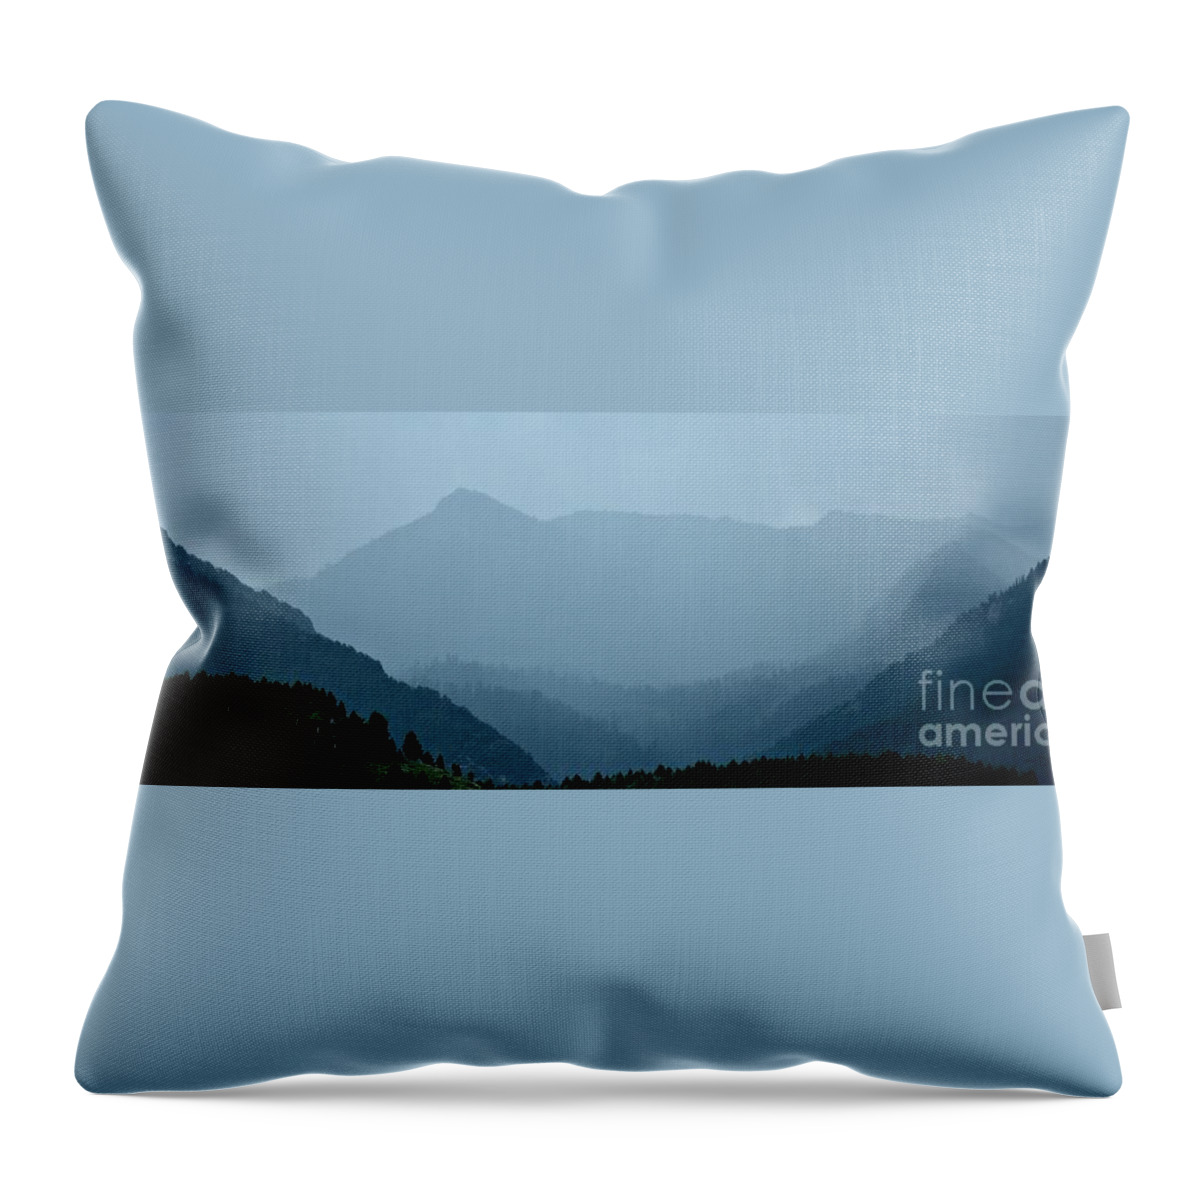 Rain Throw Pillow featuring the photograph In the Mist by Dorrene BrownButterfield